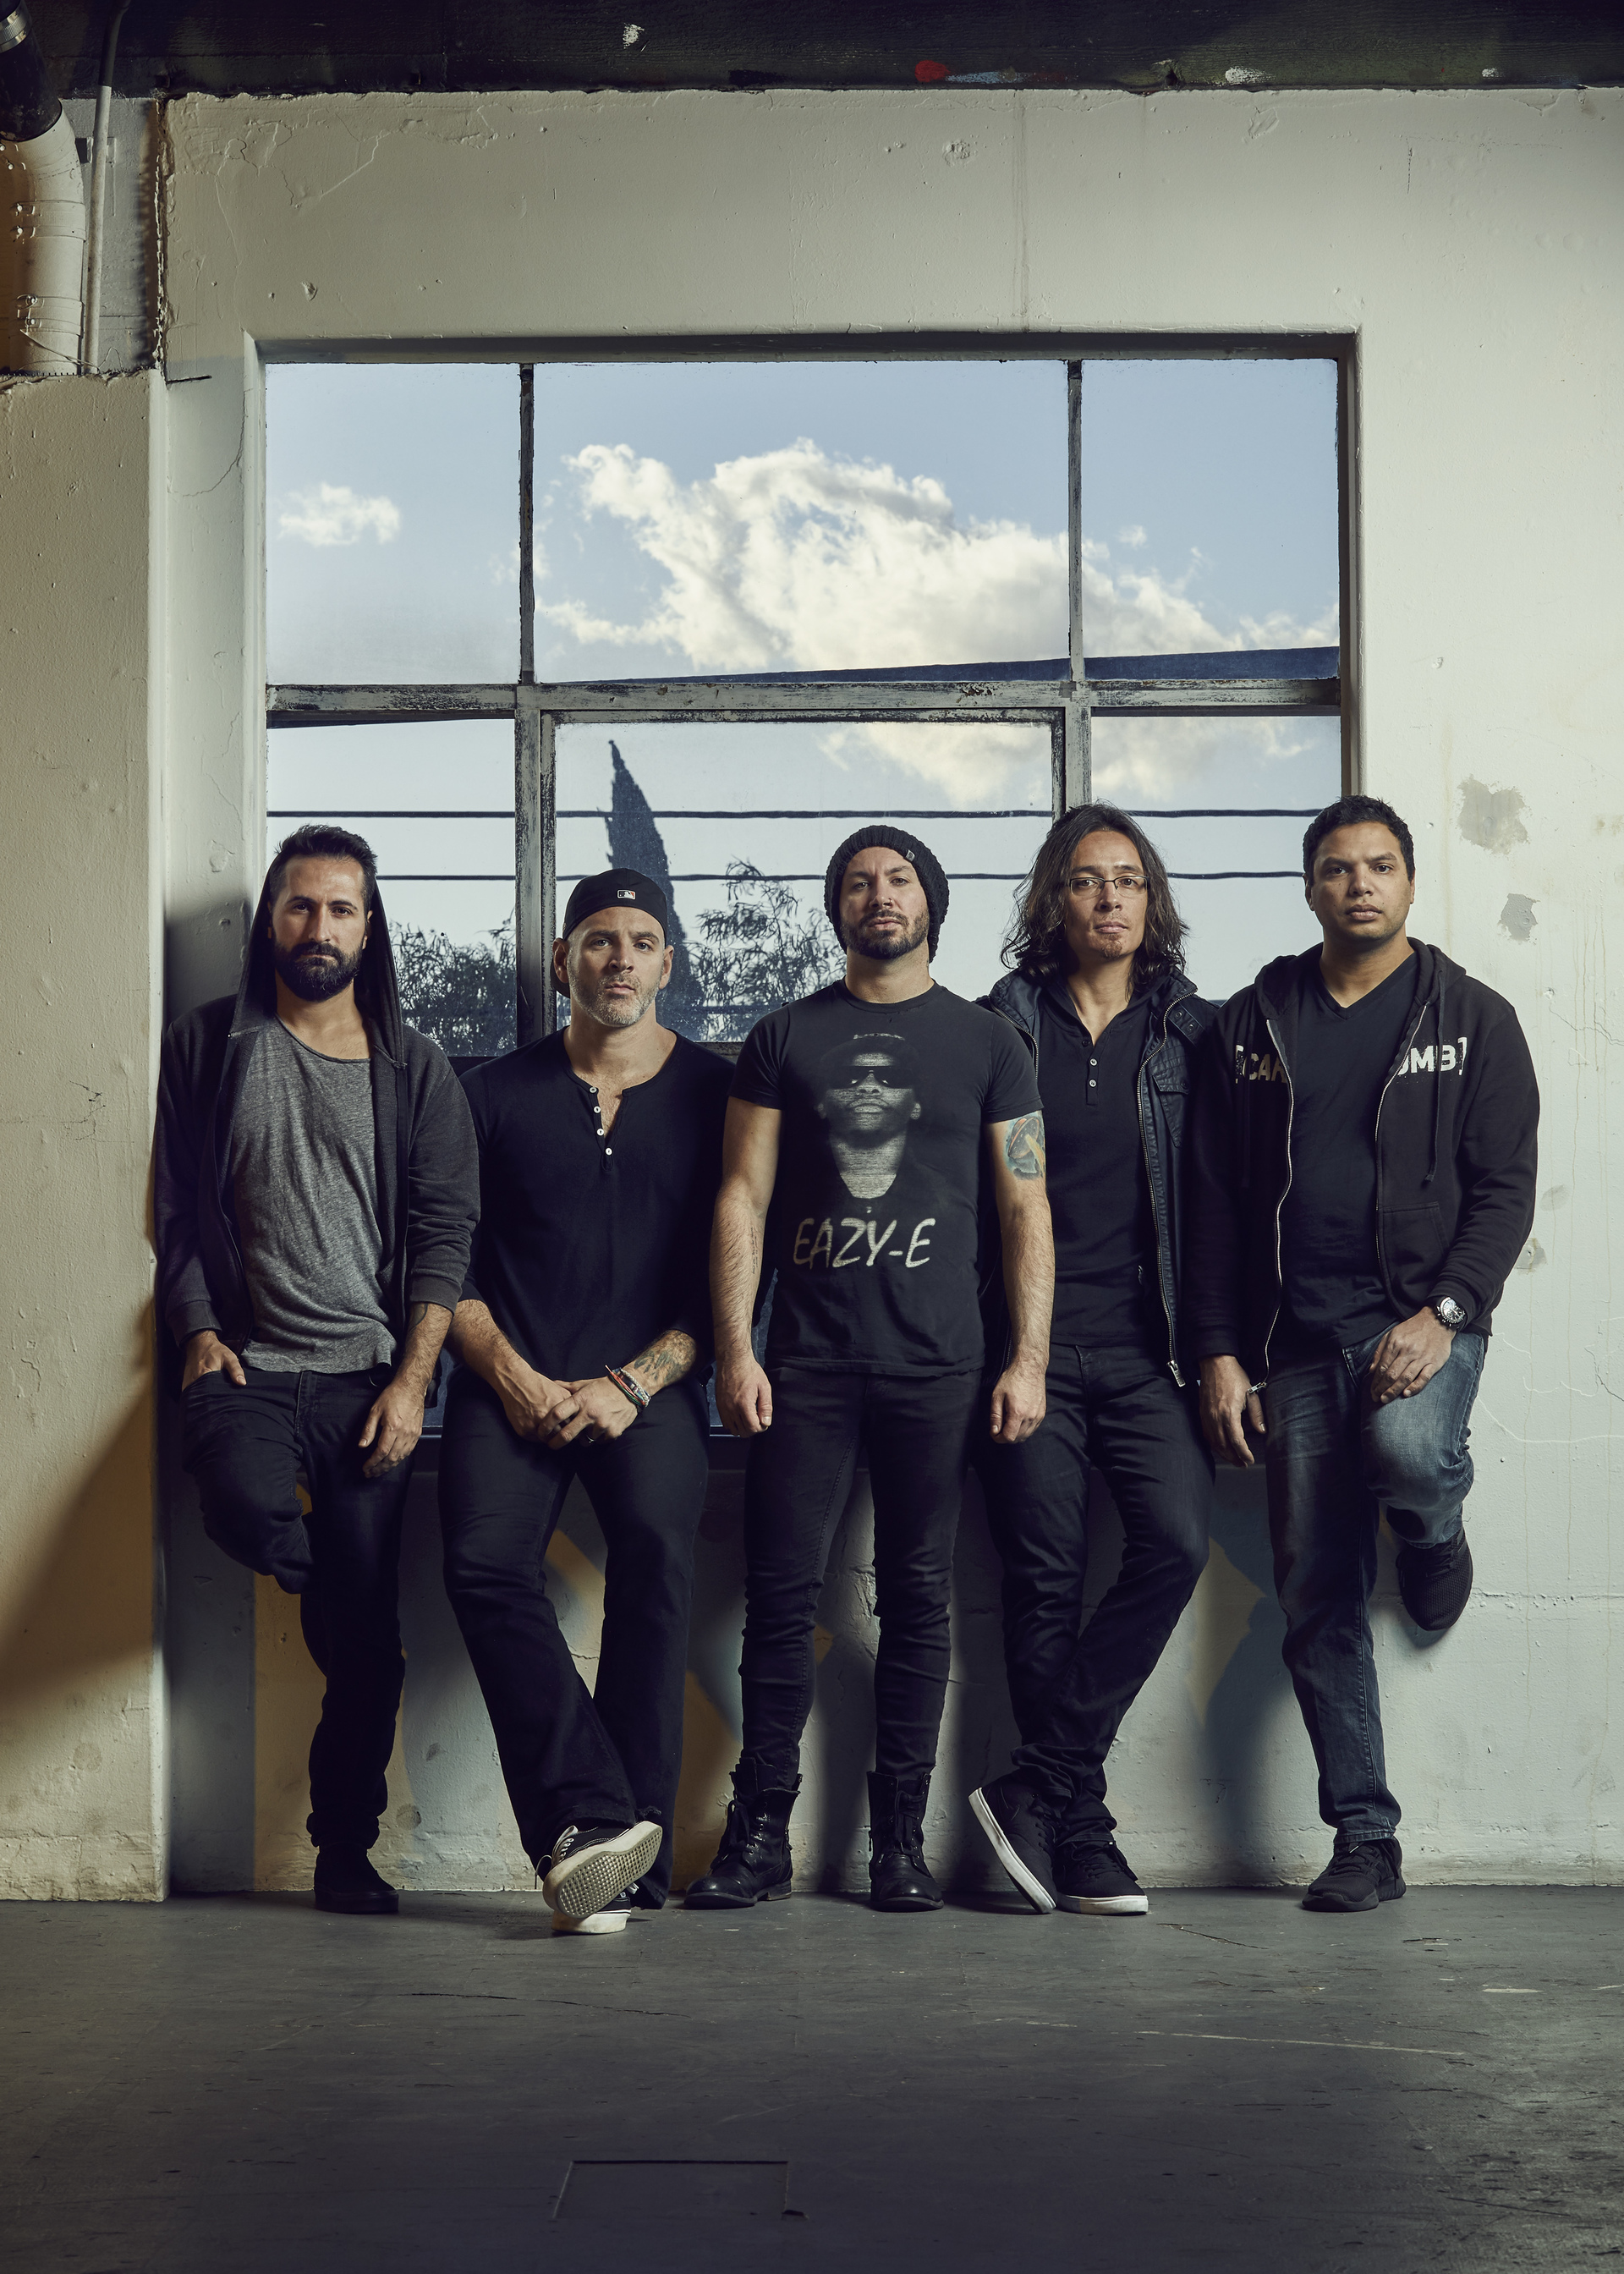 Periphery IV: HAIL STAN Takes #1 Spot on Several Billboard Charts, Enters Top Current Albums & Digital Albums Charts at #9 ​   　 